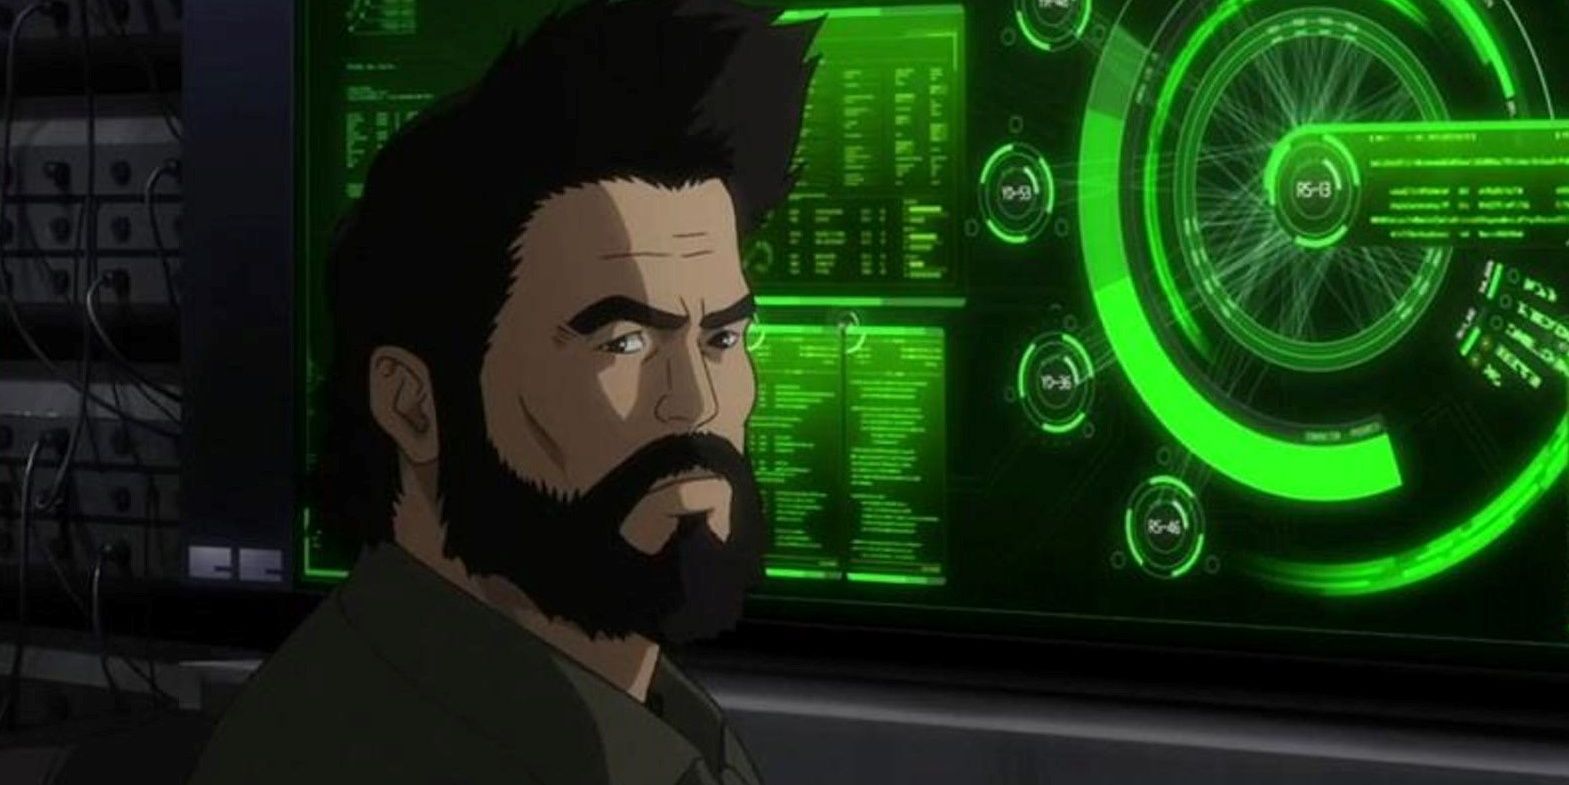 The hacker Ishikawa from Ghost in the Shell